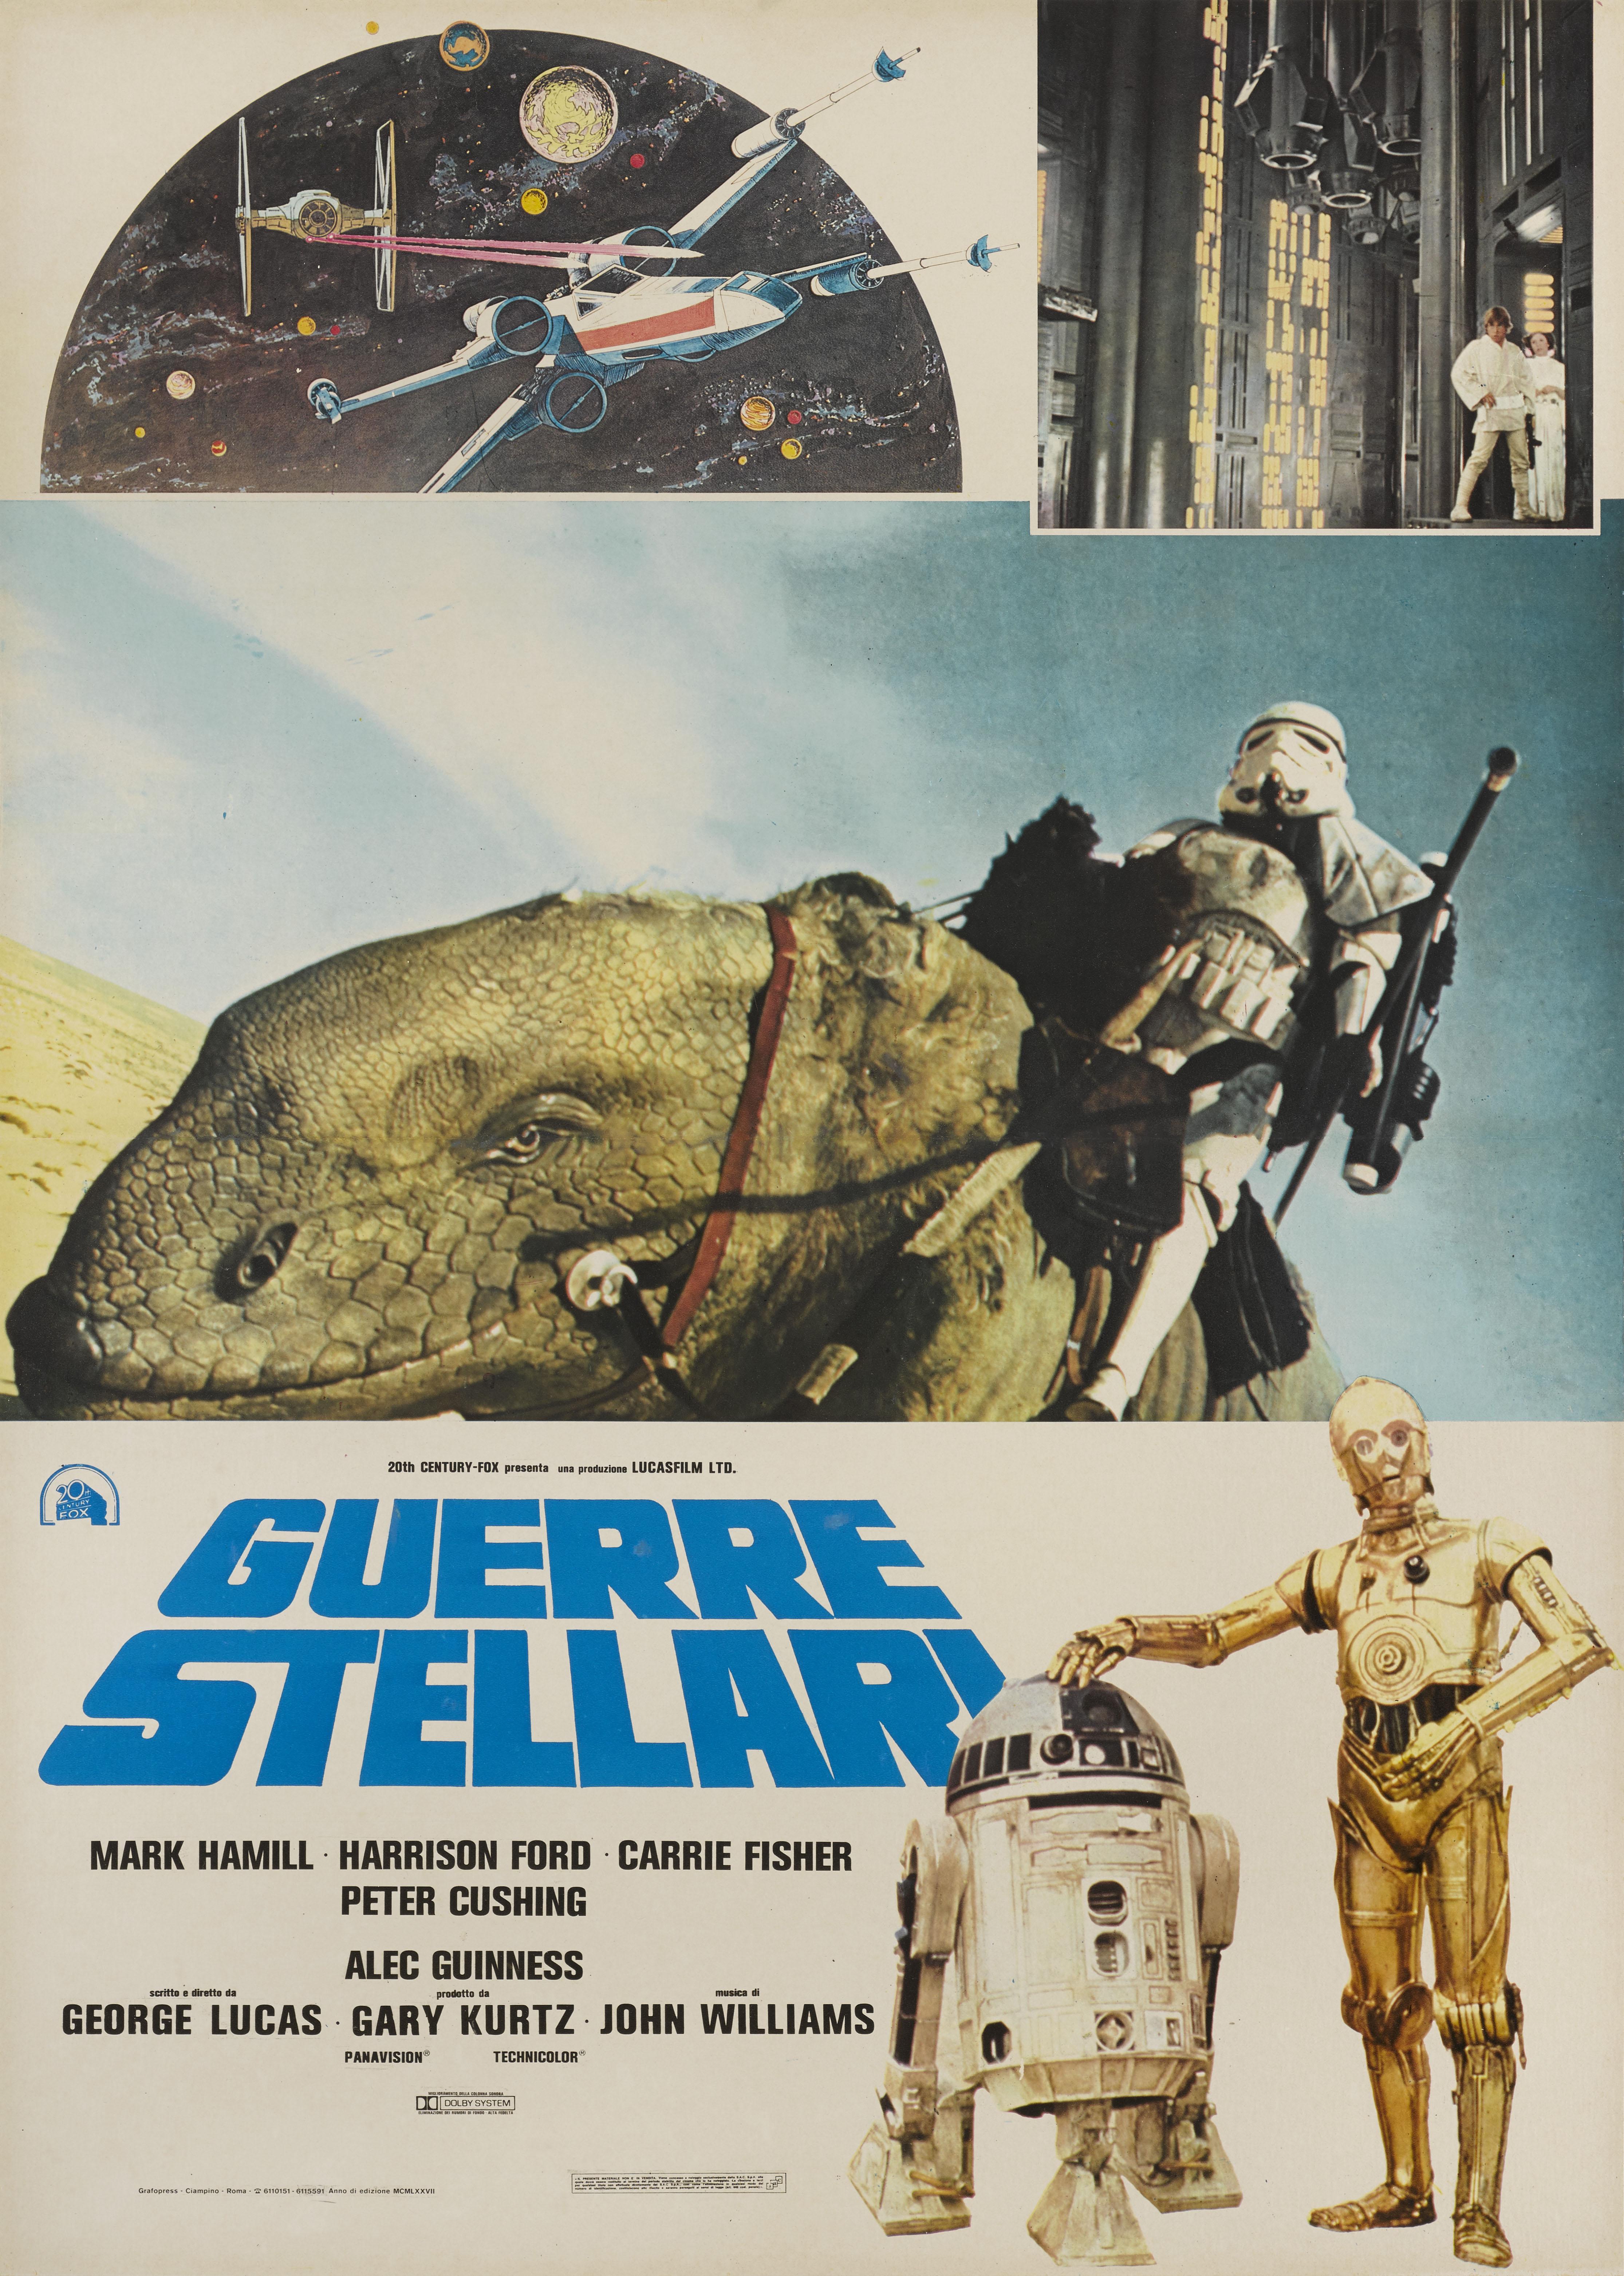 Original Italian film poster for Star Wars 1977.
The film was directed by George Lucas and starred Mark Hamill, Harrison Ford, Carrie Fisher.
This poster is linen backed and would be shipped rolled in a strong tube.